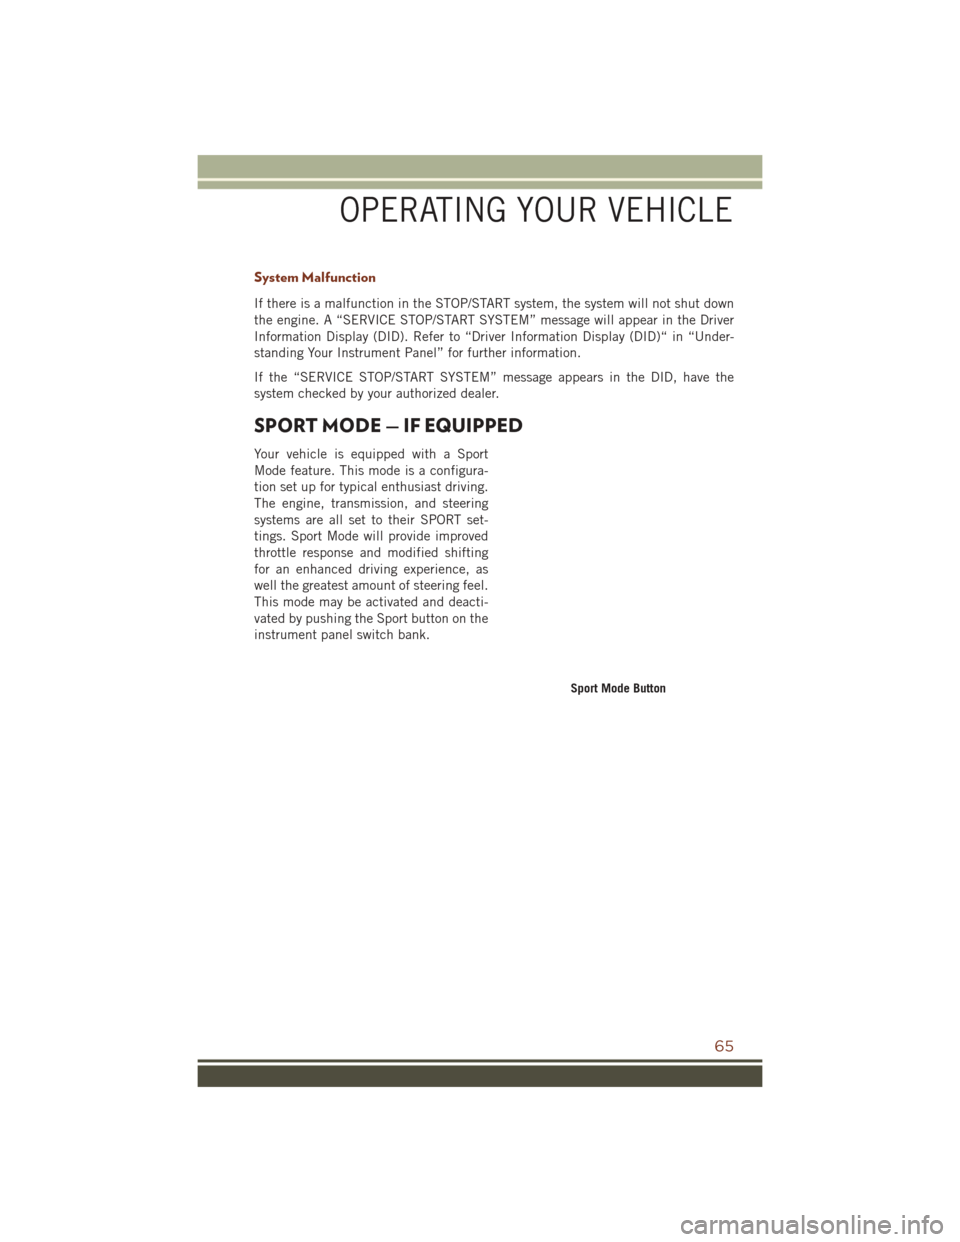 JEEP GRAND CHEROKEE 2016 WK2 / 4.G Owners Manual System Malfunction
If there is a malfunction in the STOP/START system, the system will not shut down
the engine. A “SERVICE STOP/START SYSTEM” message will appear in the Driver
Information Display